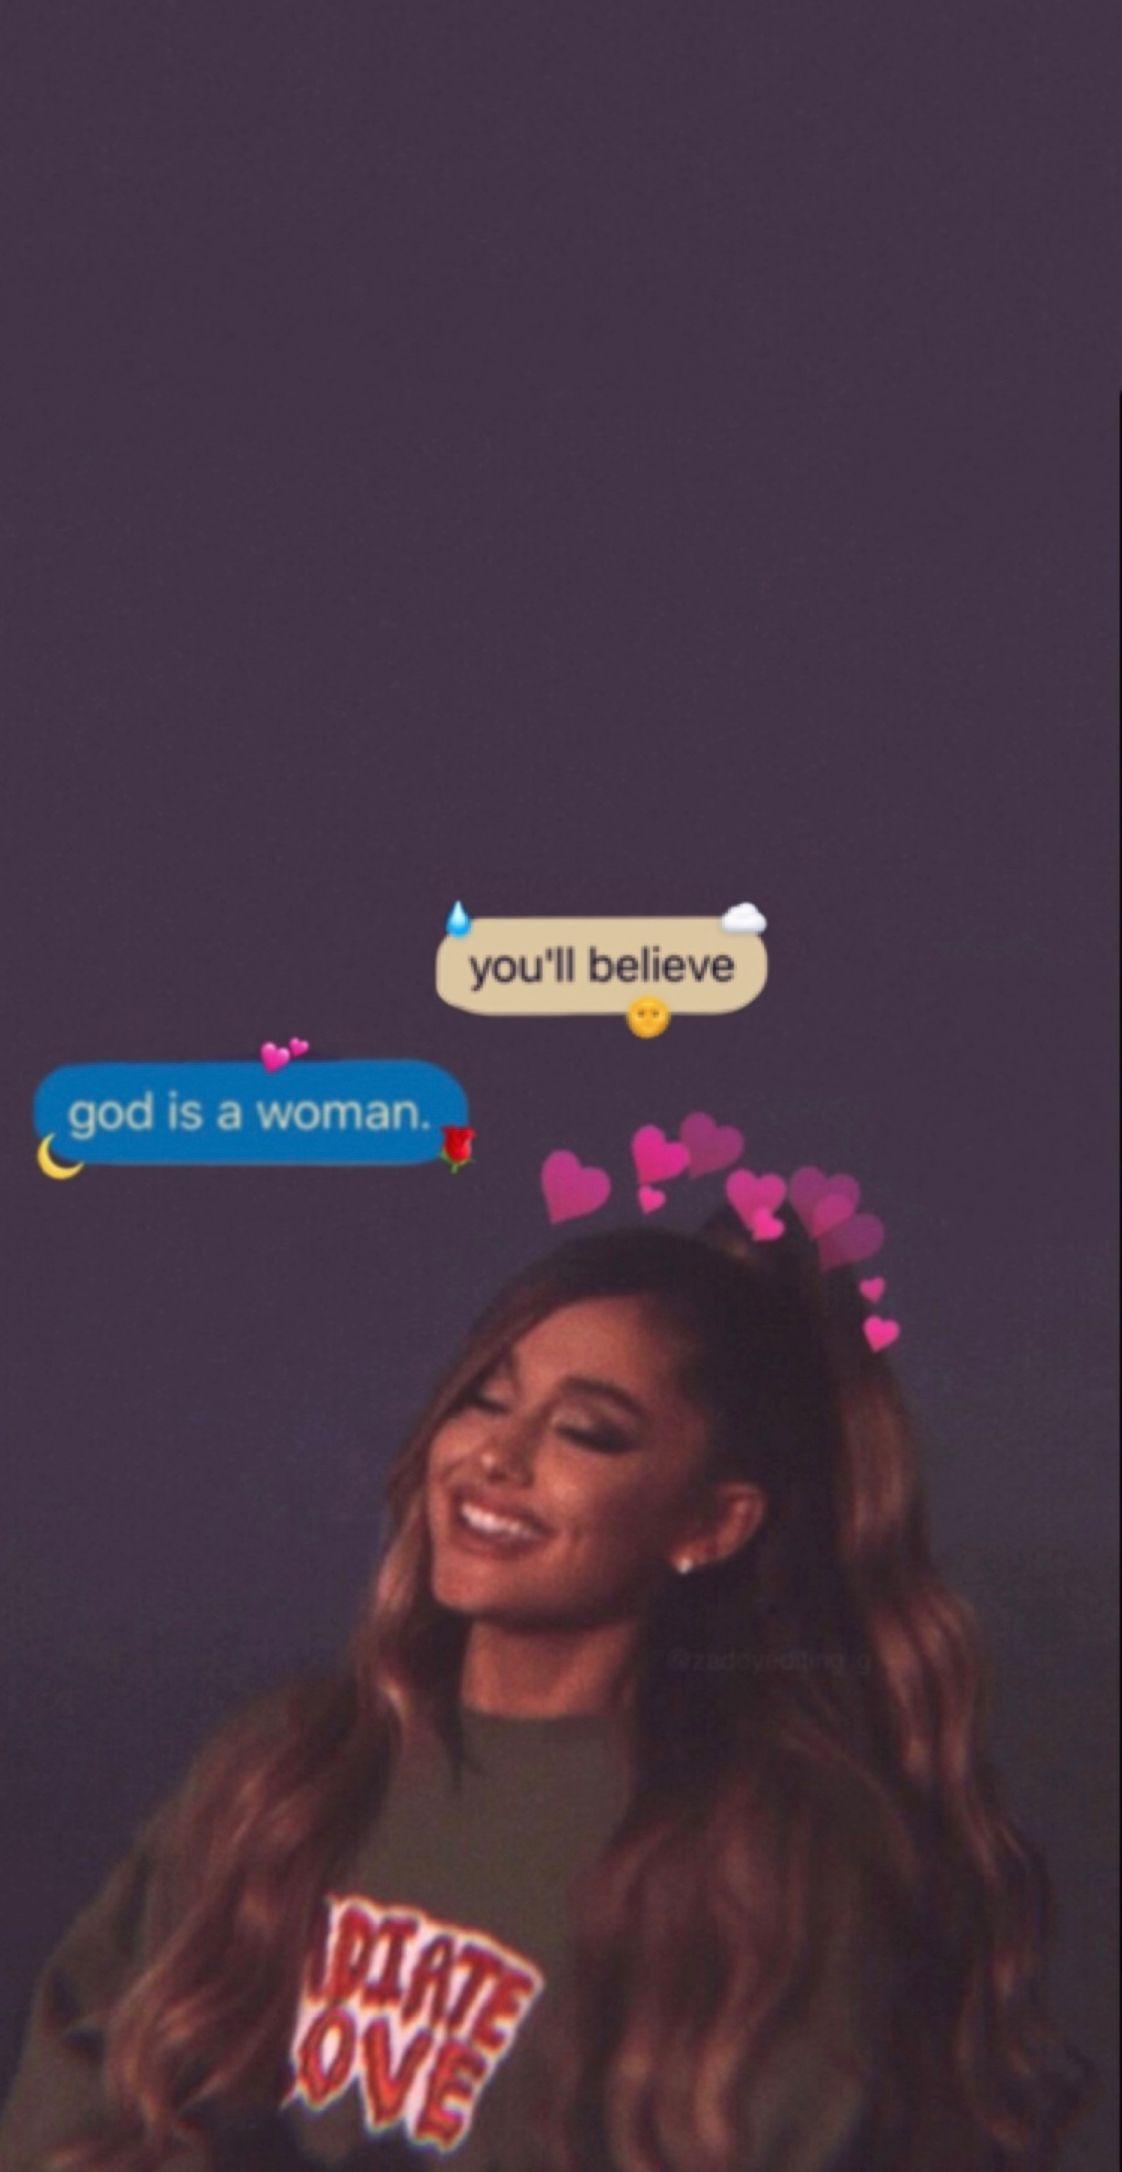 A woman is shown with her phone - Ariana Grande